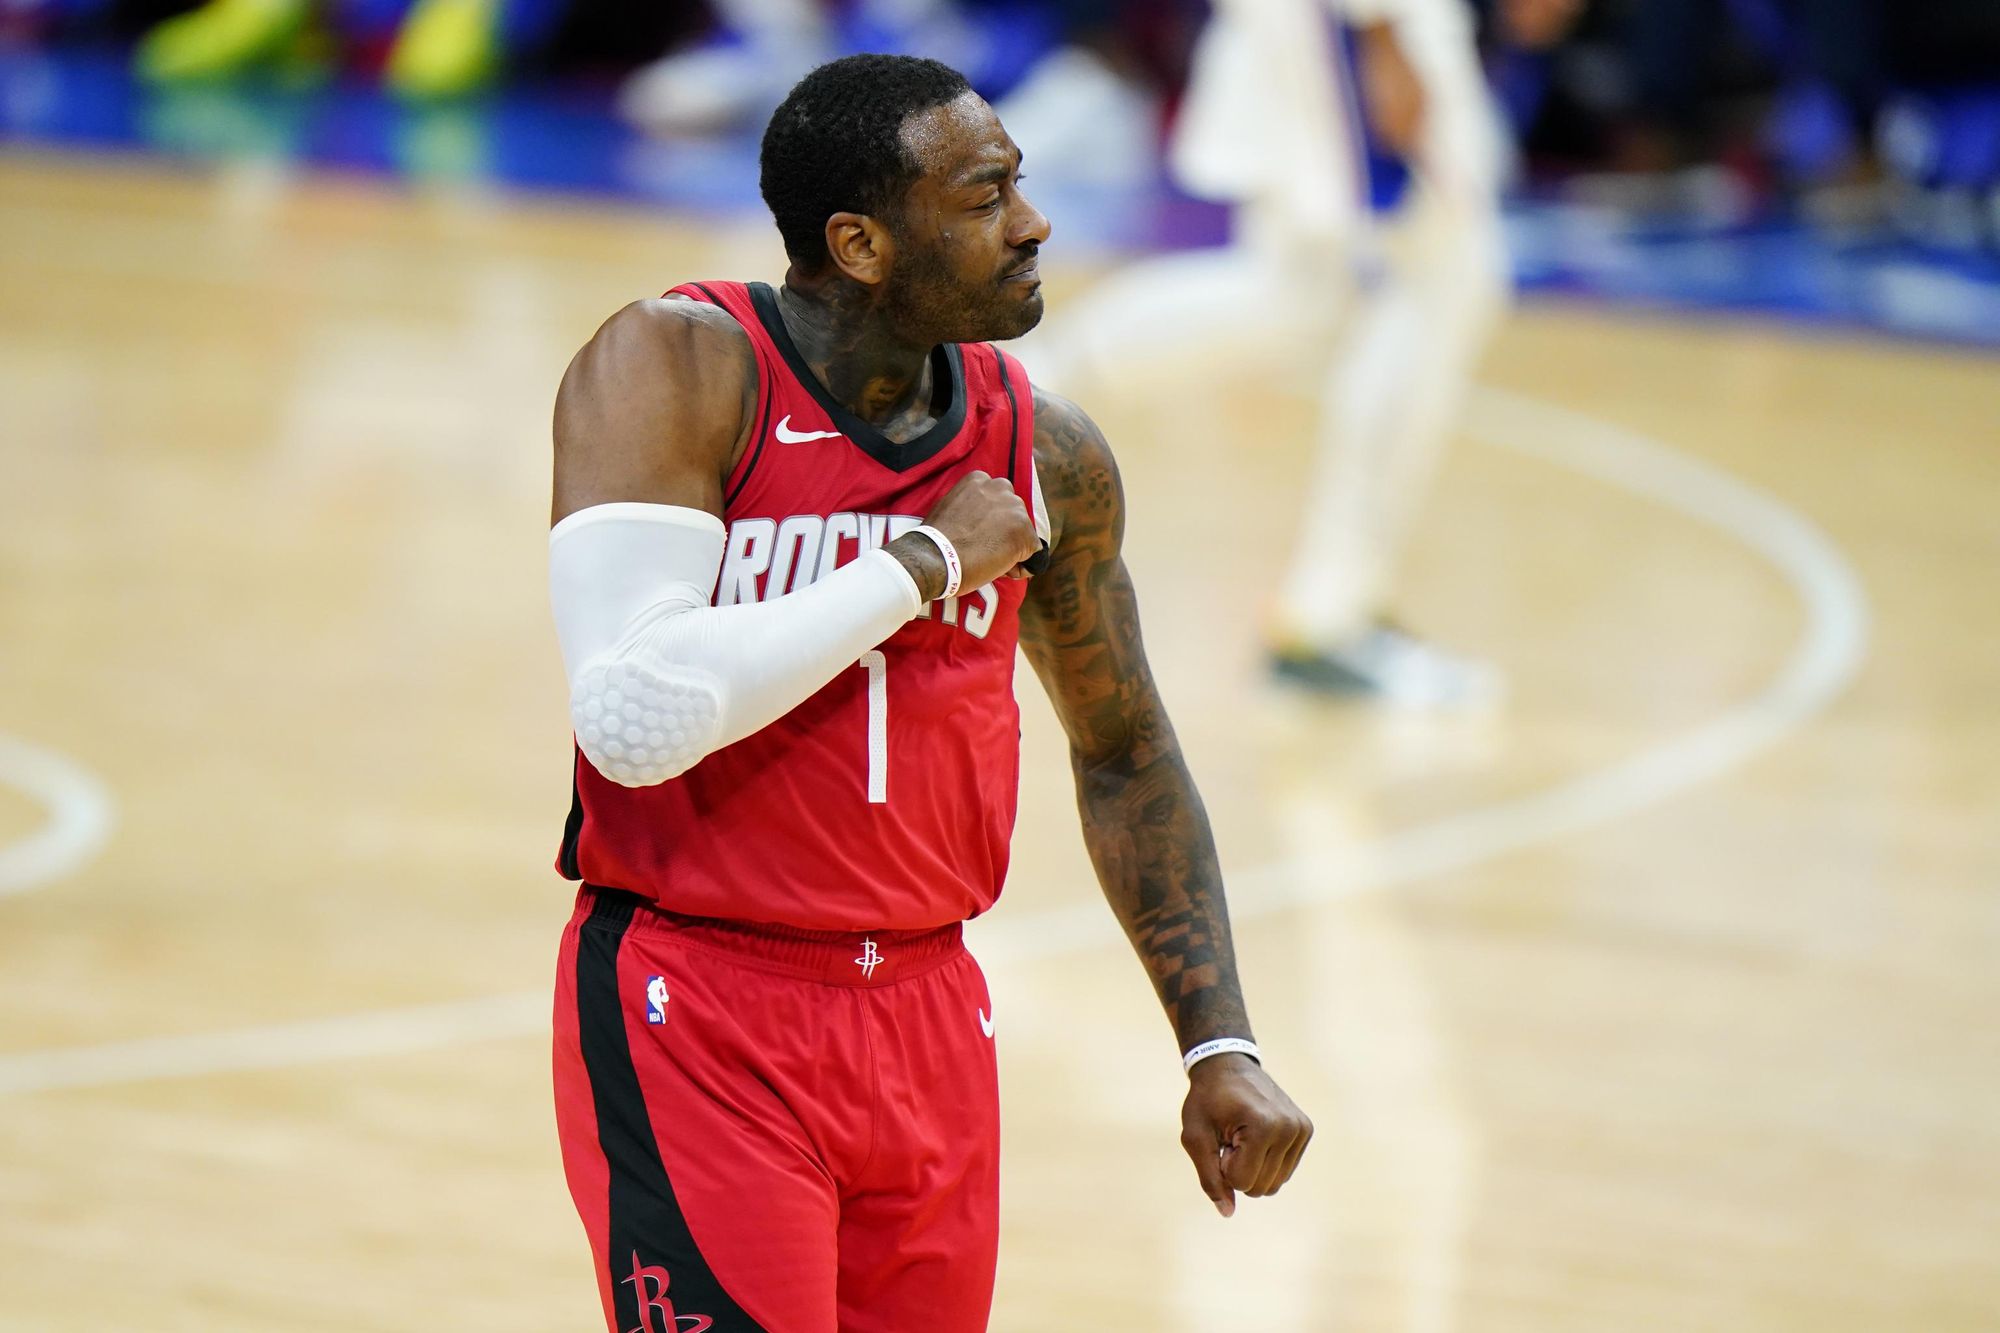 NBA Injury Report: Houston Rockets Star John Wall To Sit Out The Rest Of The Season